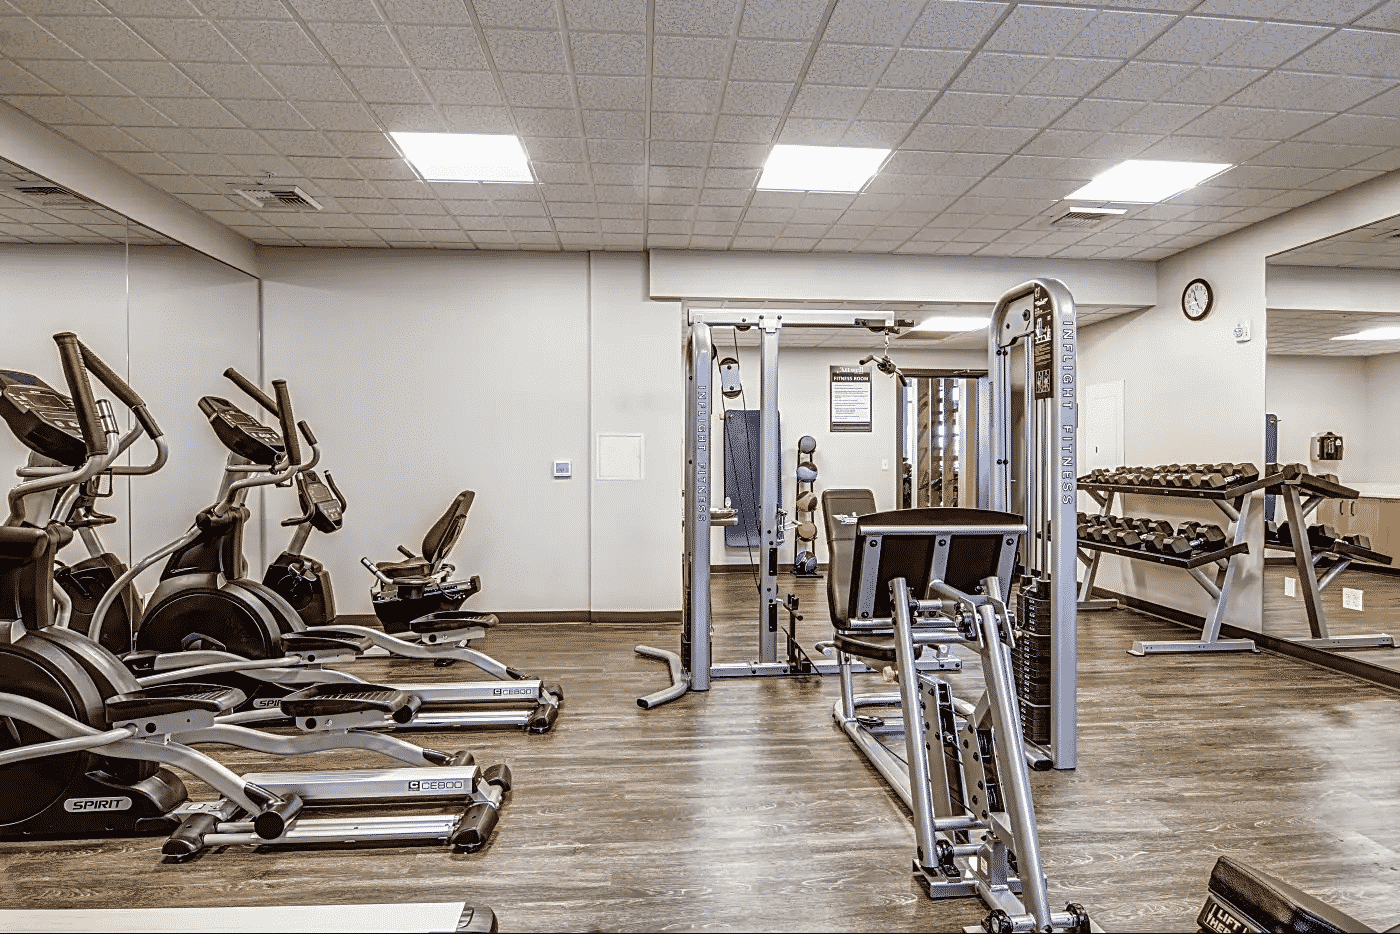 Fitness center with cardio machines and a few individual weight machines